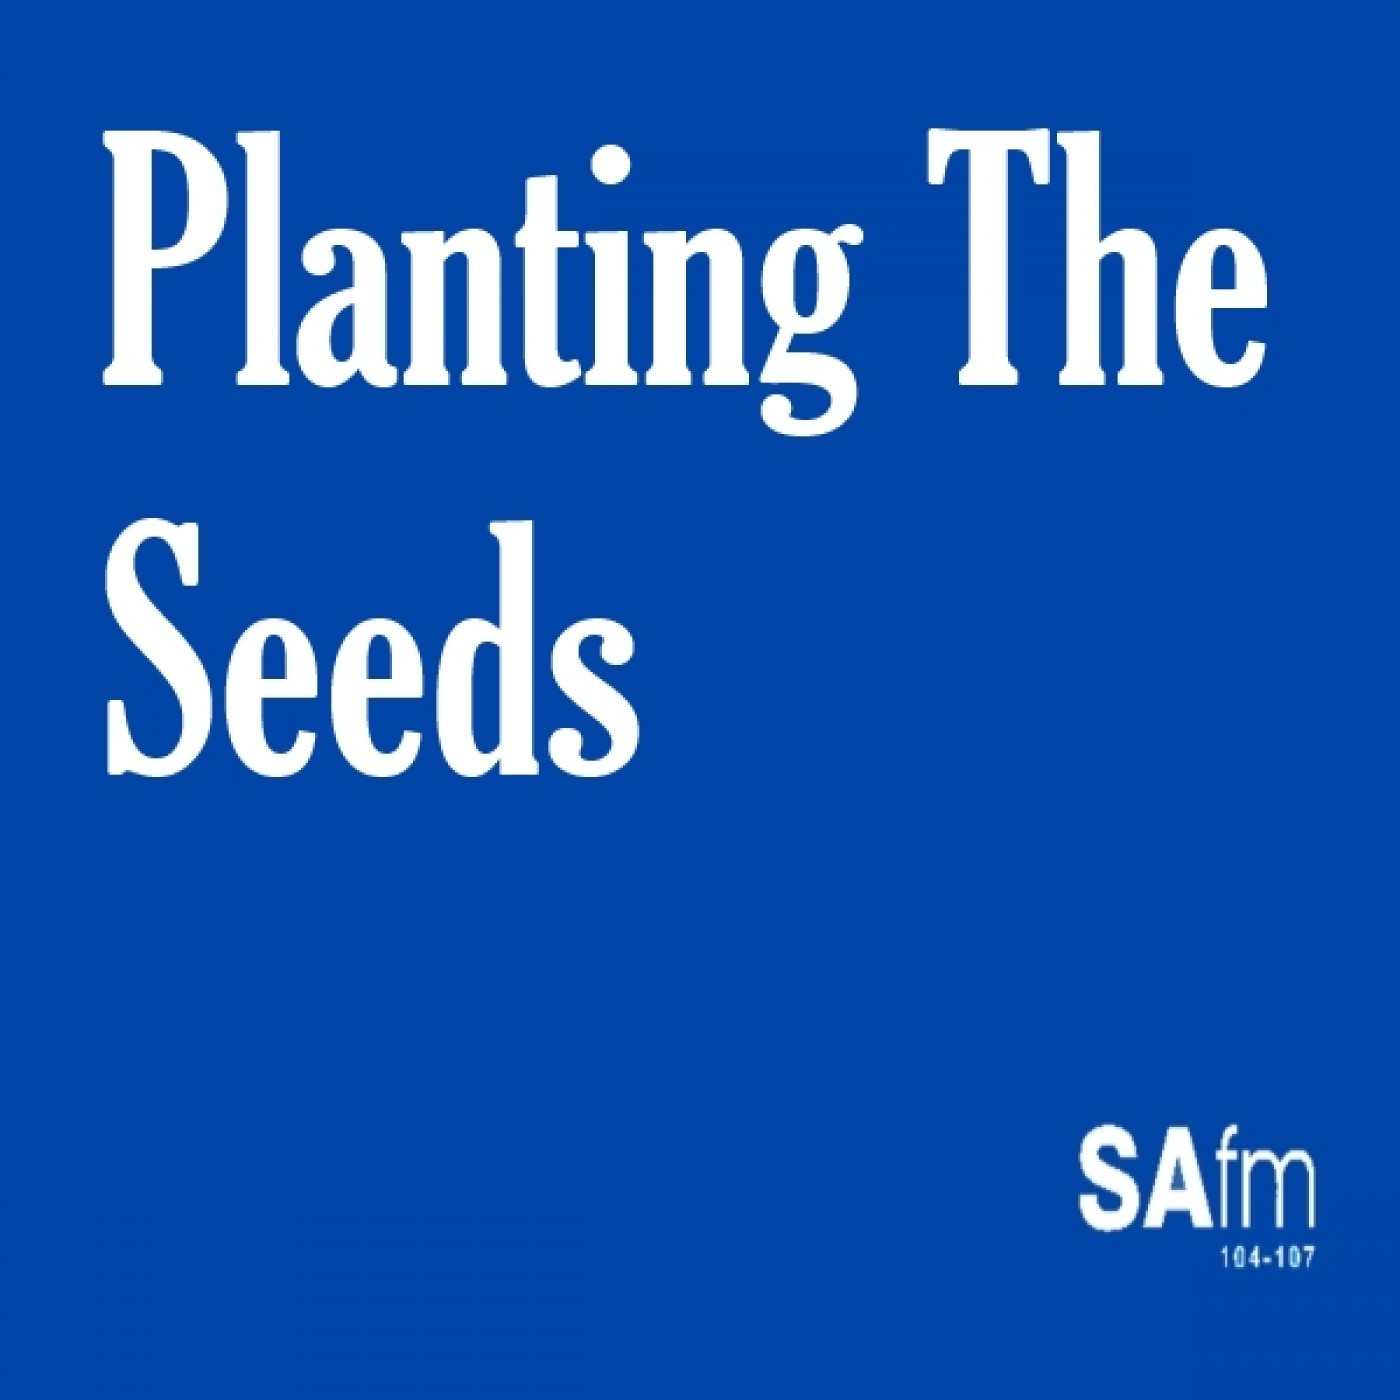 22-03-2019 PLANTING THE SEEDS